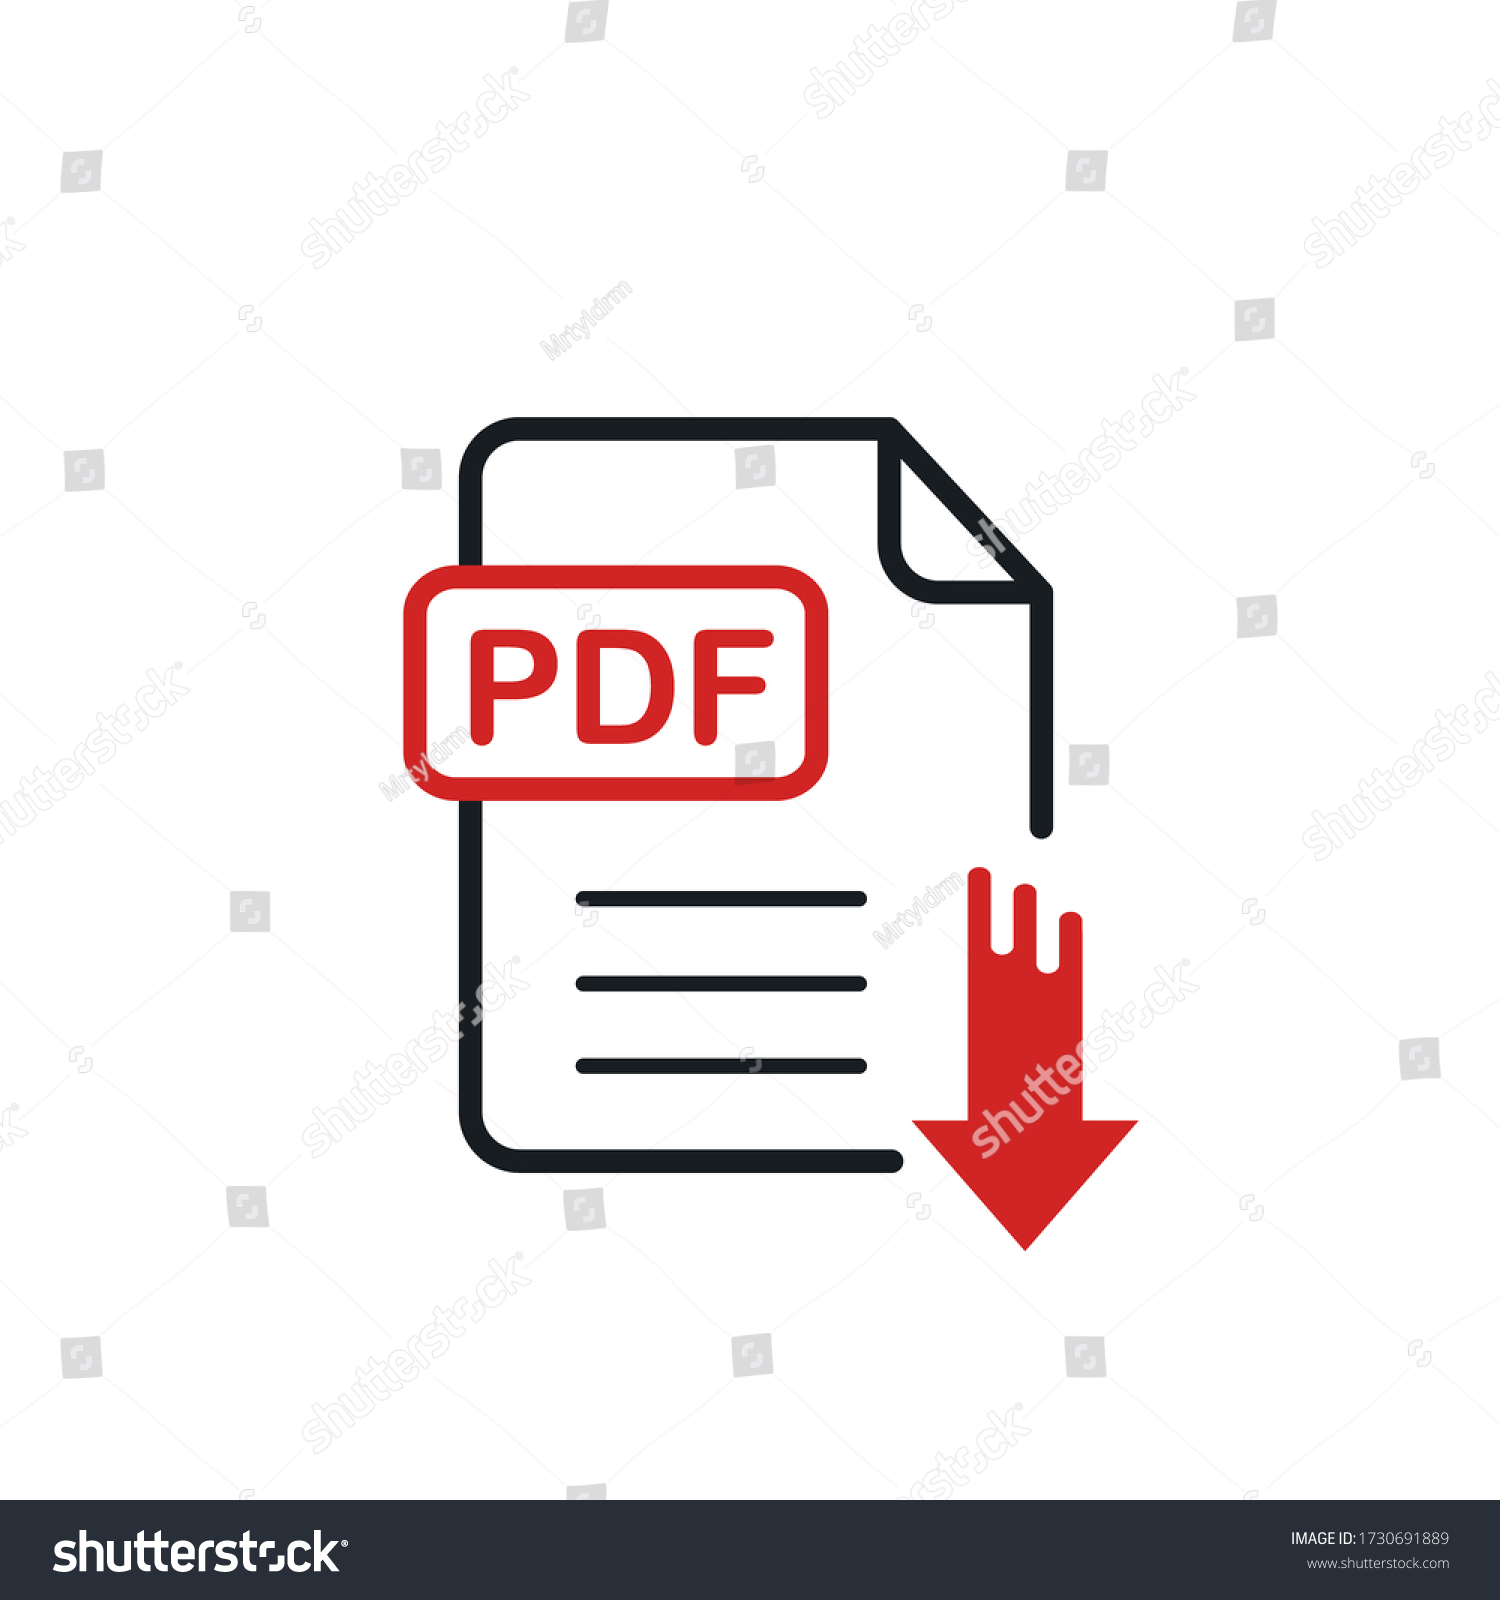 Pdf Format File Vector Icon Stock Vector Royalty Free Shutterstock